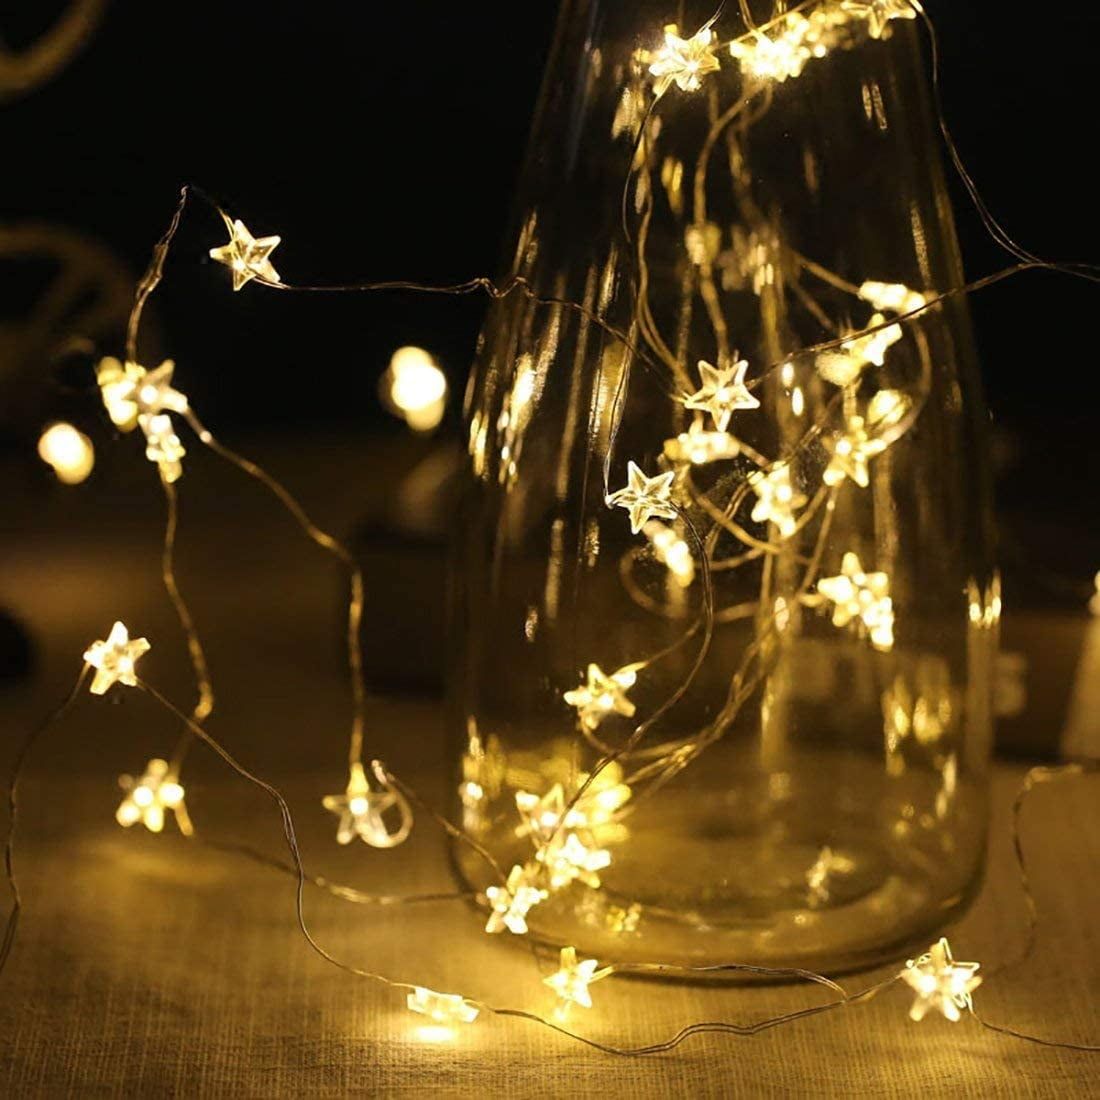 A string of fairy lights in the shape of stars - Fairy lights